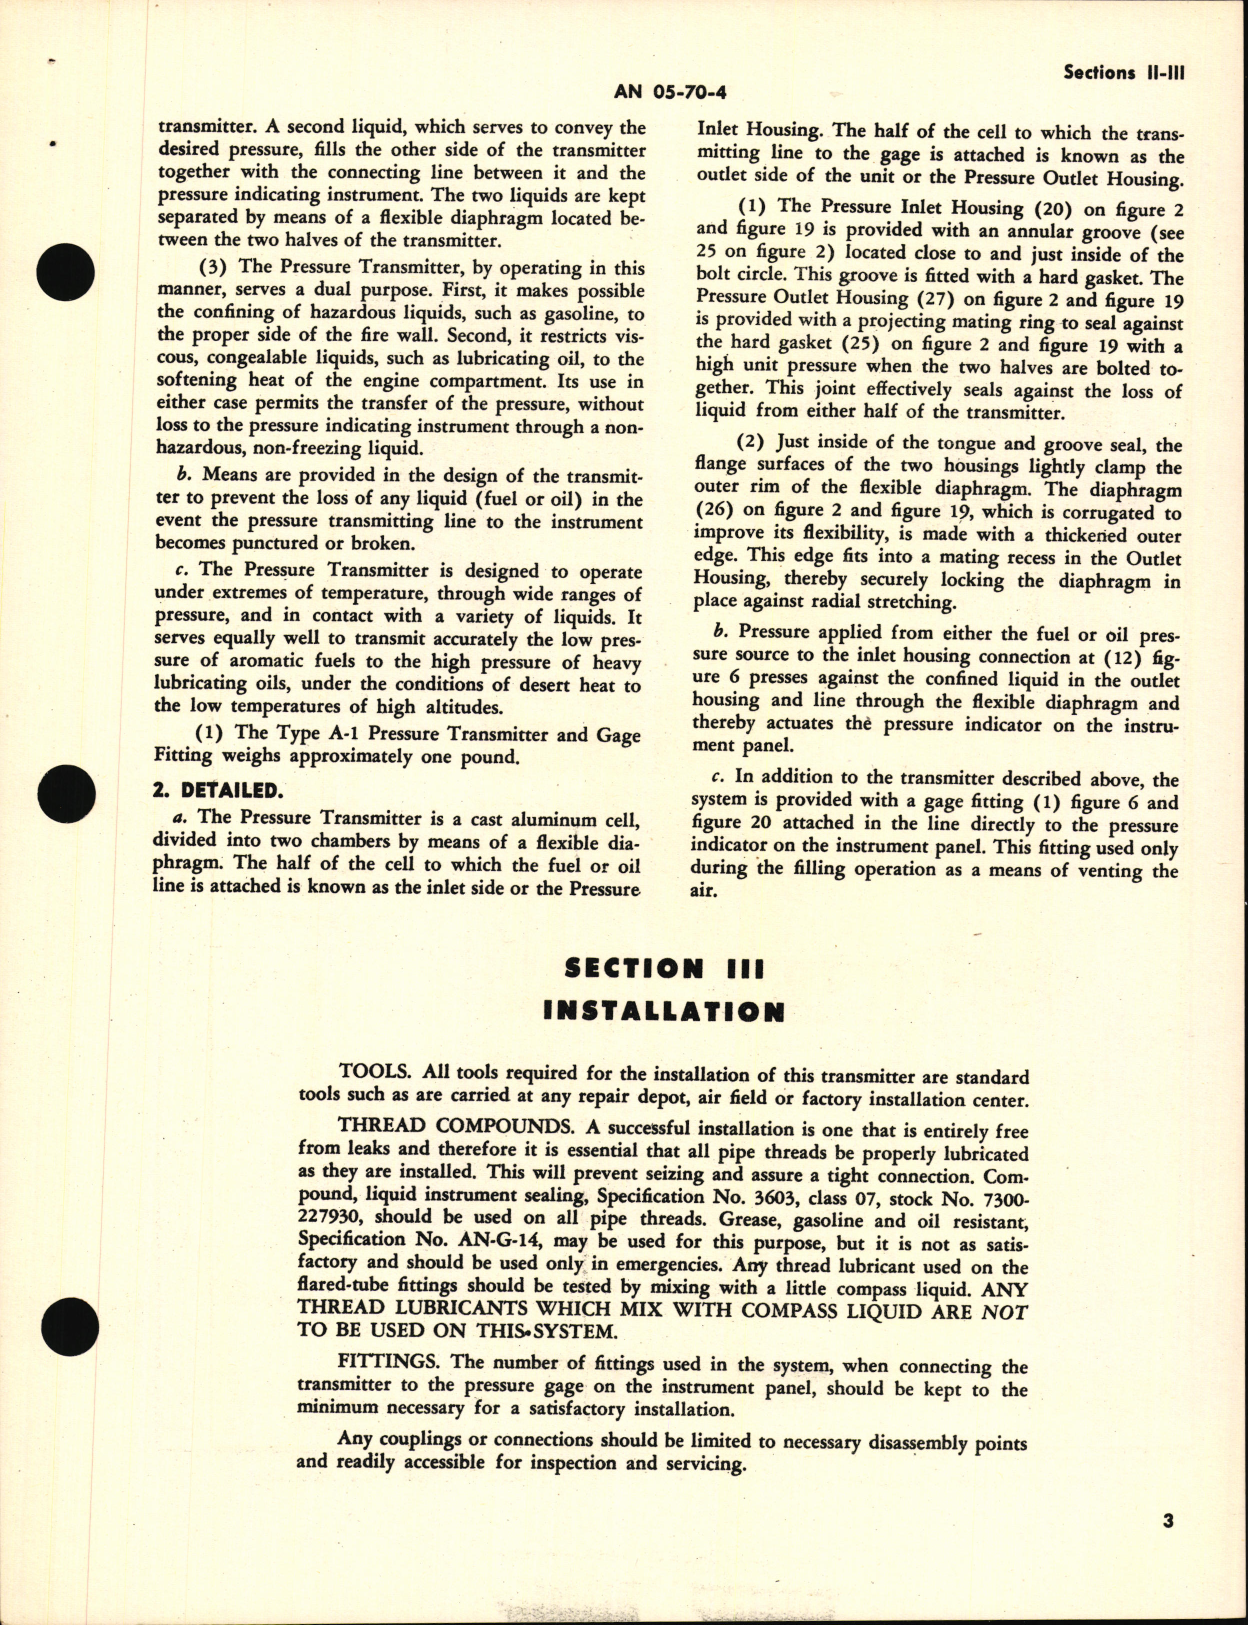 Sample page 7 from AirCorps Library document: Handbook of instructions with Parts Catalog for F.S.S.C. 88-T-2145 and A-1 Pressure Transmitter (Fuel & Oil)